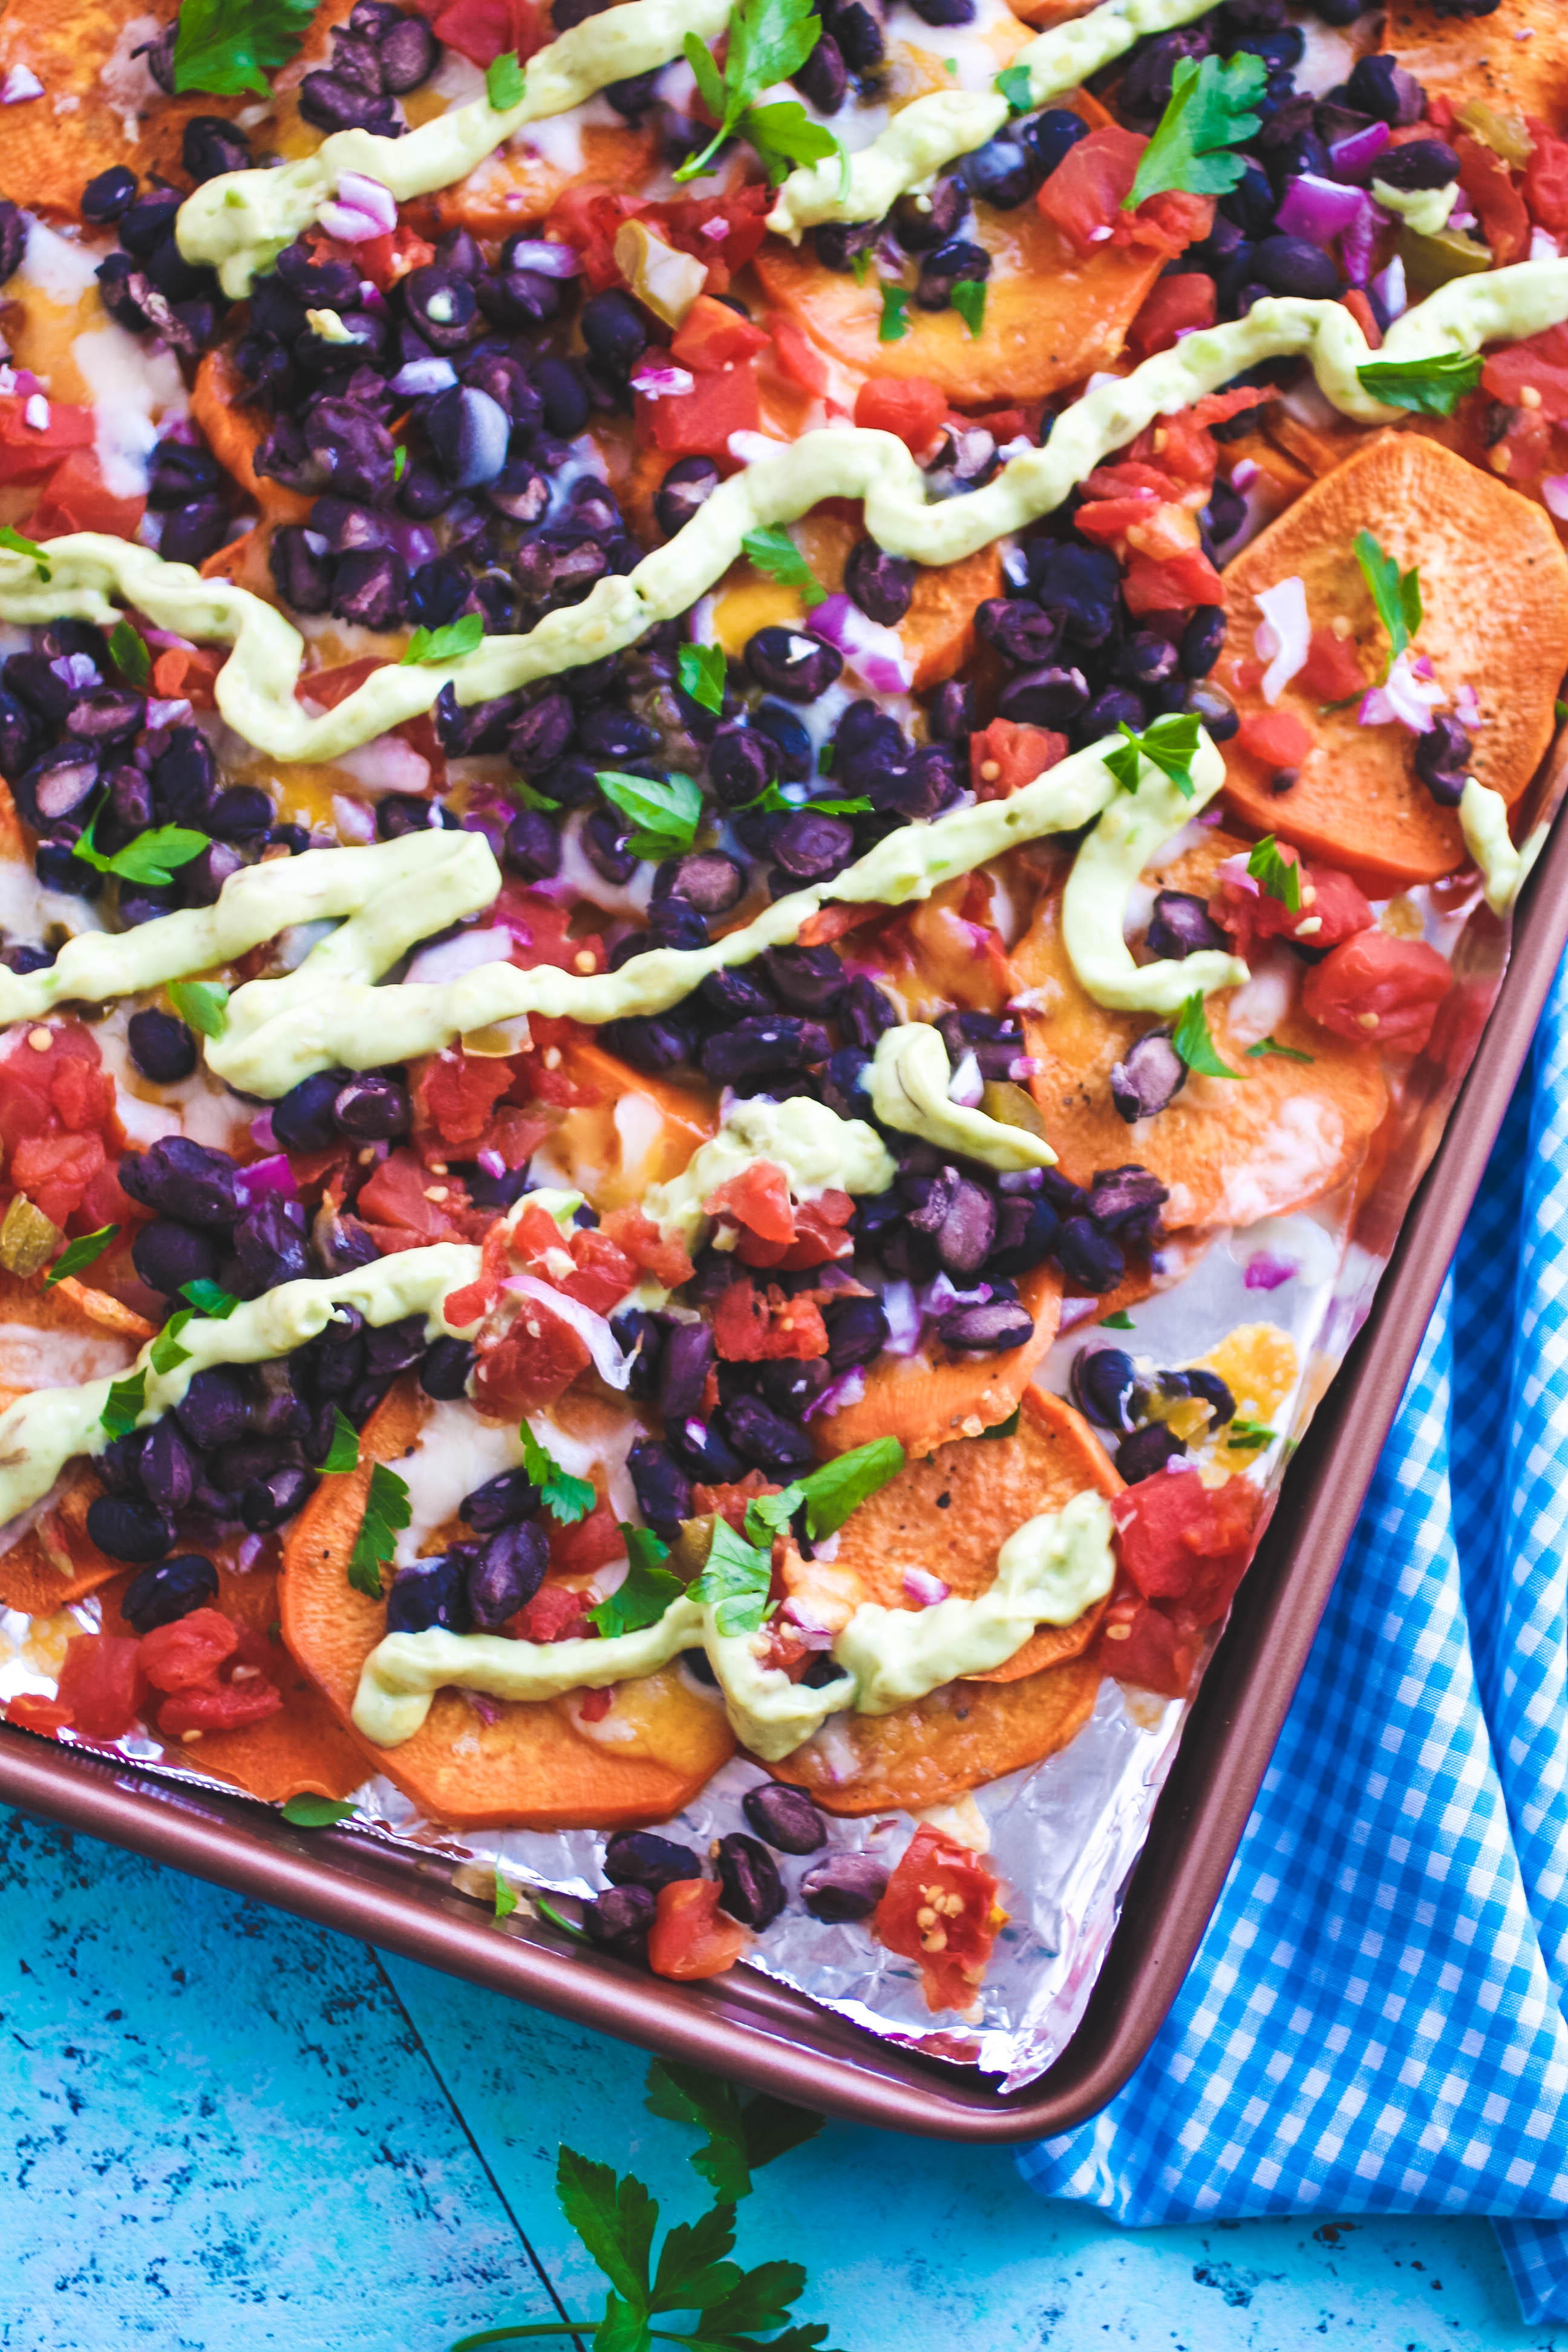 Sweet Potato Nachos with Avocado Crema make a great snack! Sweet Potato Nachos with Avocado Crema are filling and fun to snack on.